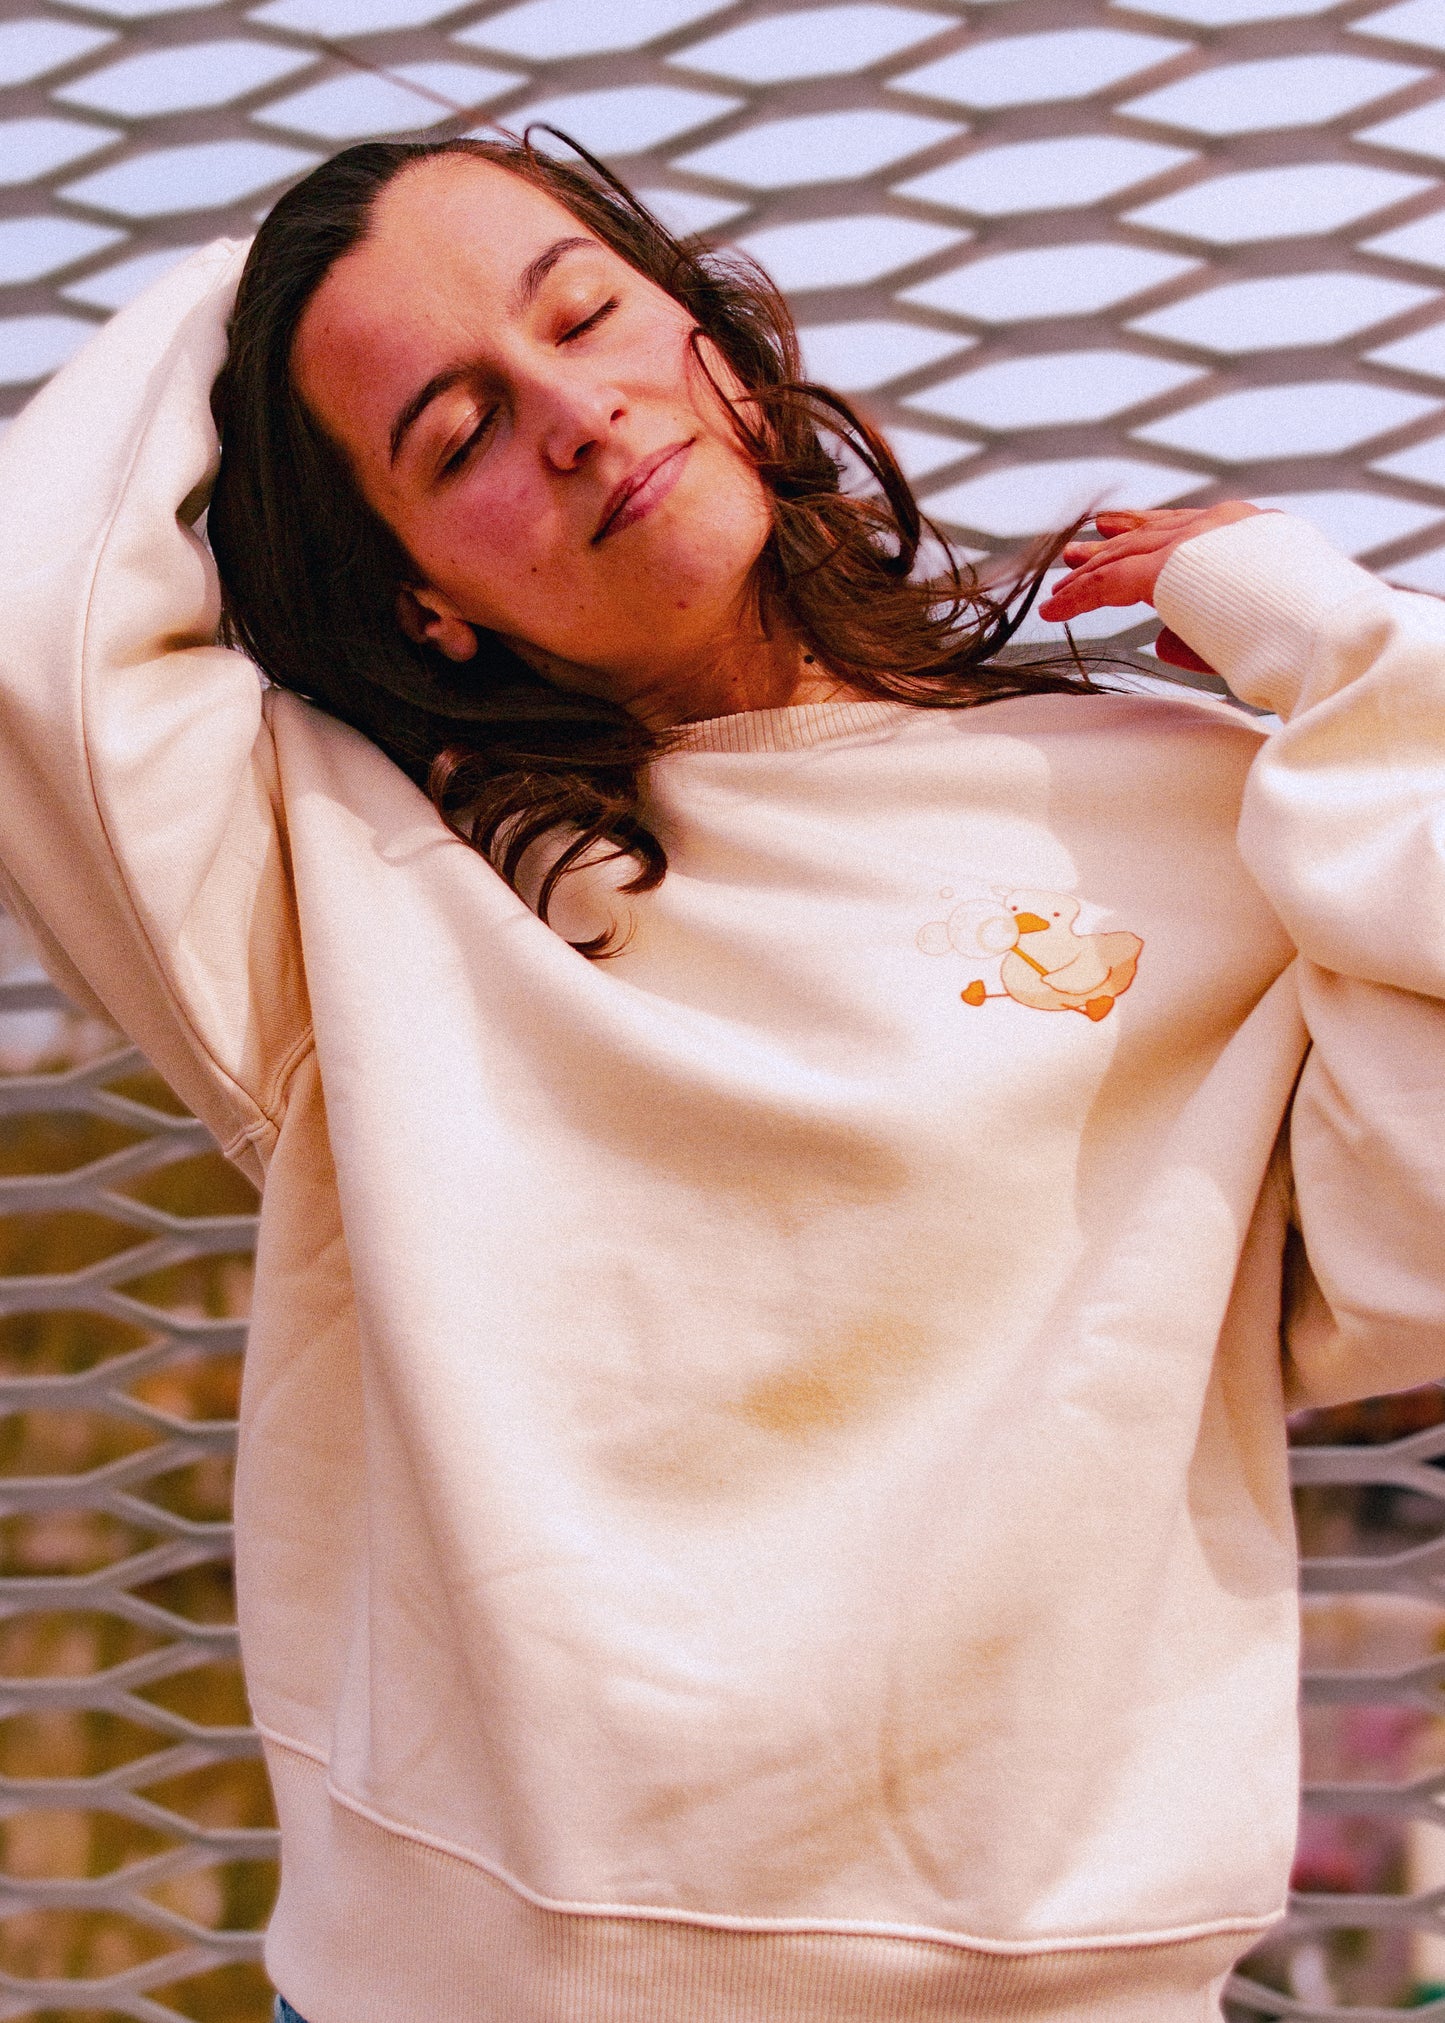 UNISEX sweatshirt - Duckling and the flowered boot